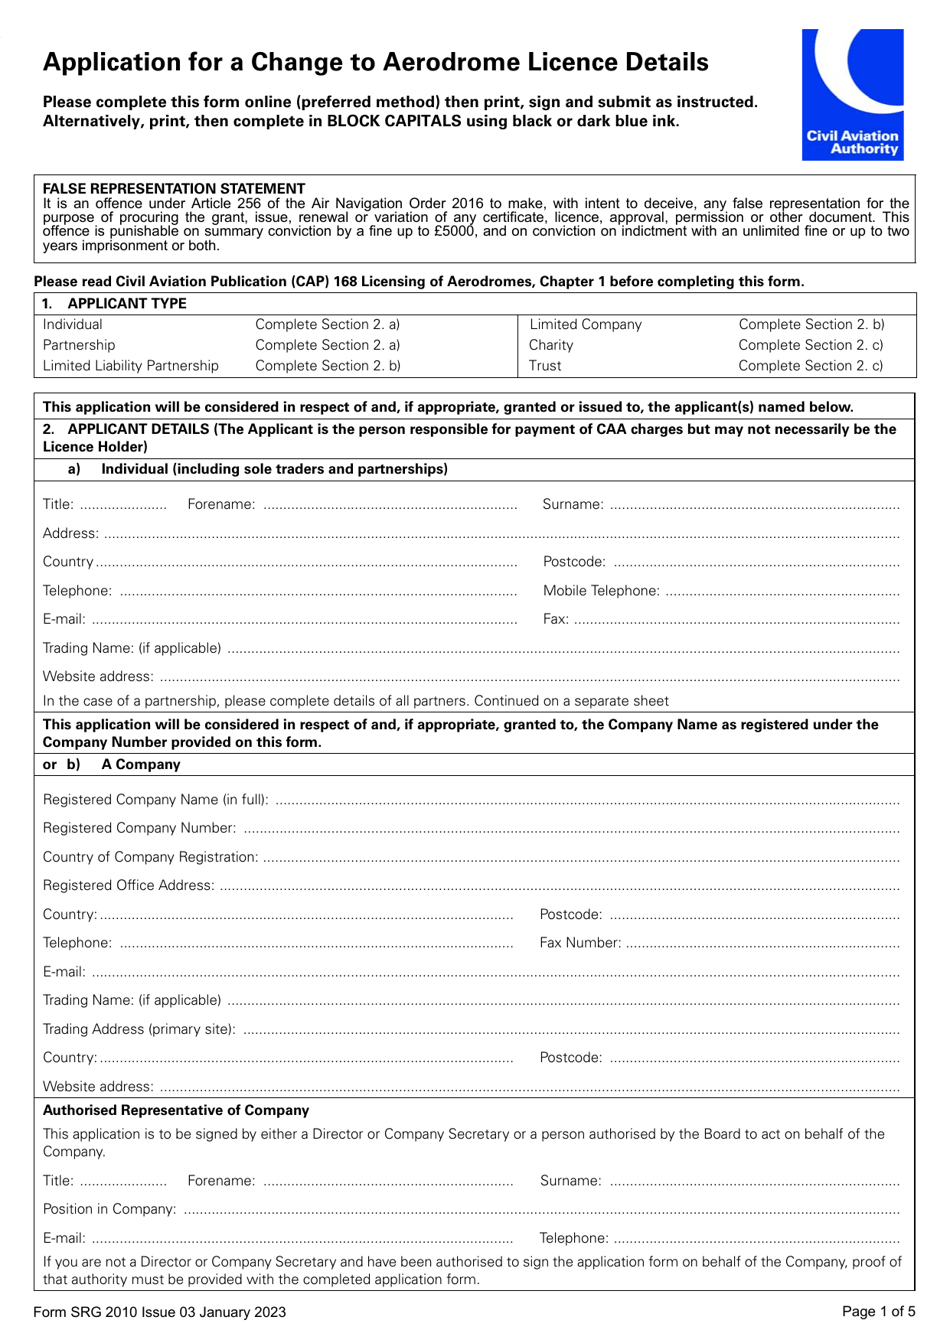 Form SRG2010 Application for a Change to Aerodrome Licence Details - United Kingdom, Page 1